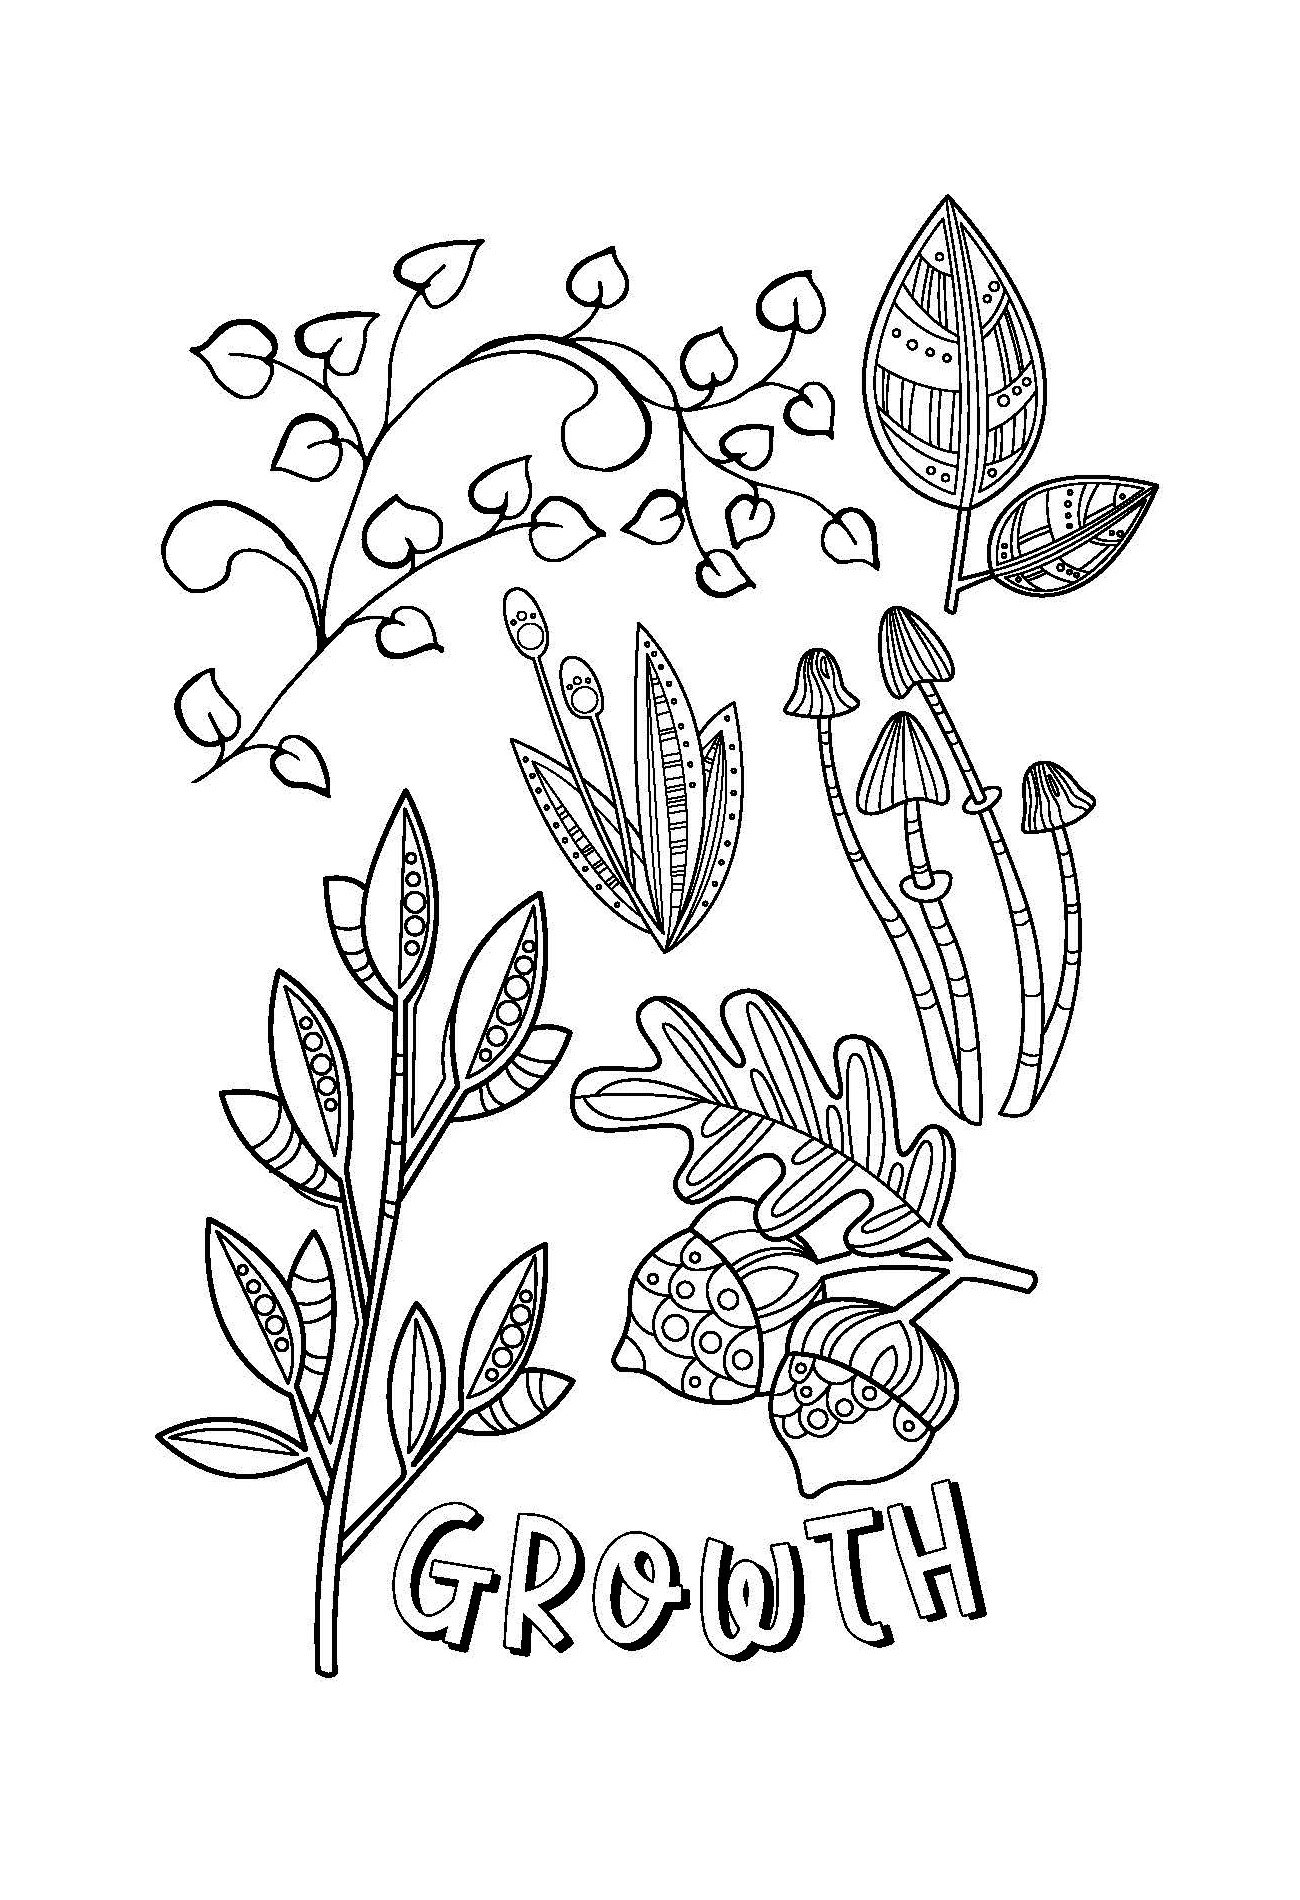 Growth Colouring Page - Digital Download